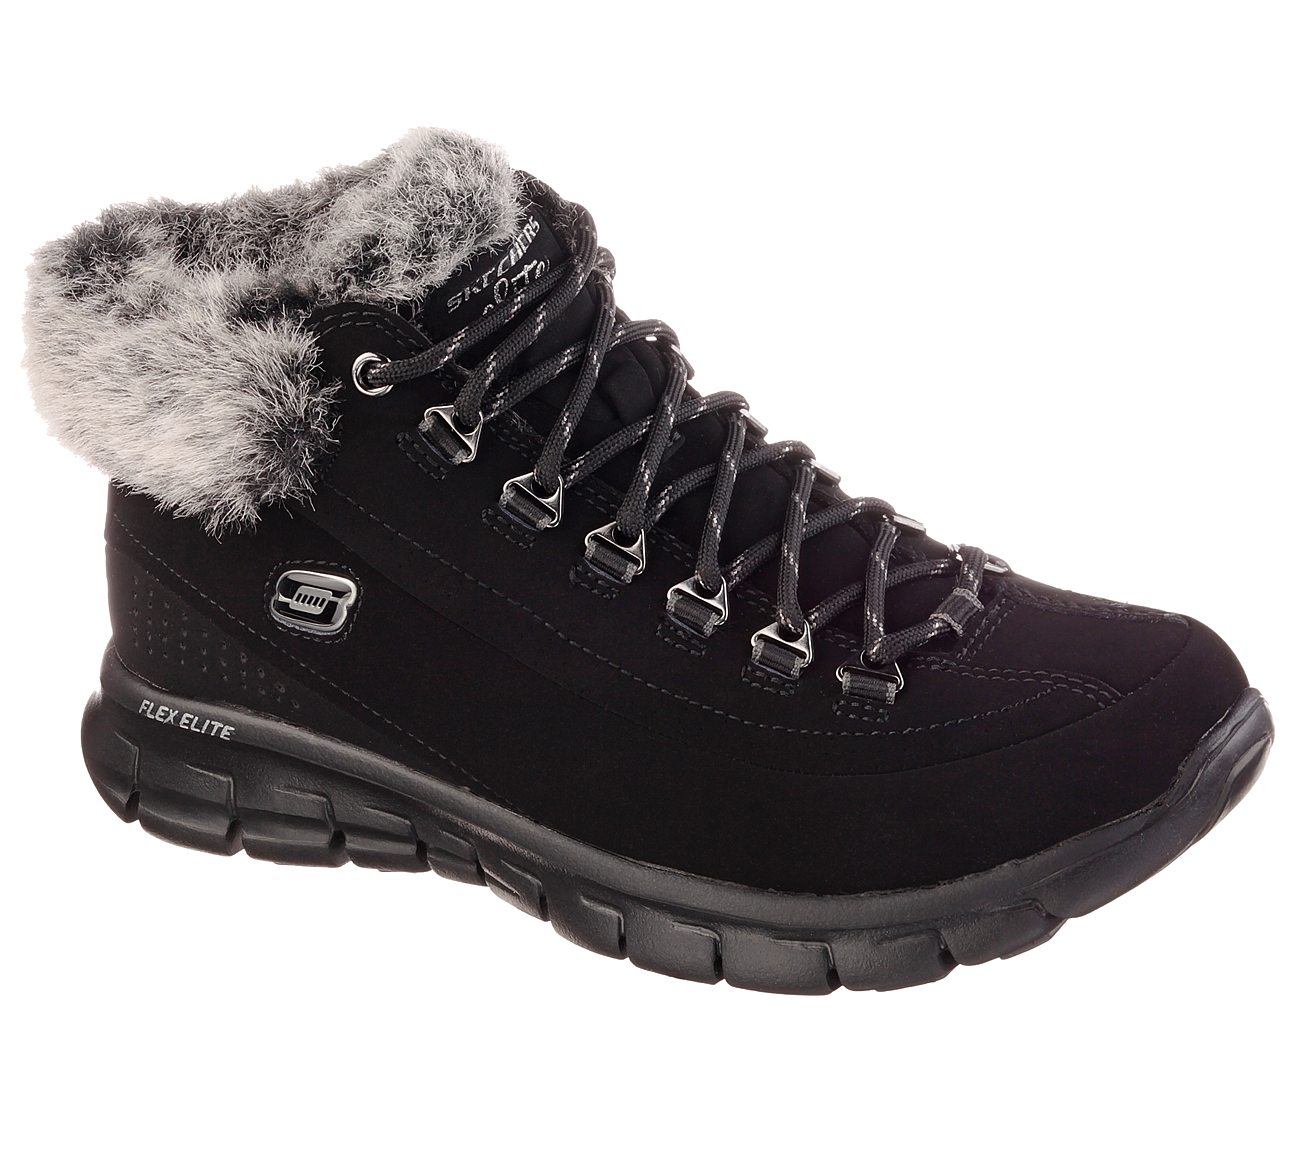 skechers shoes india online